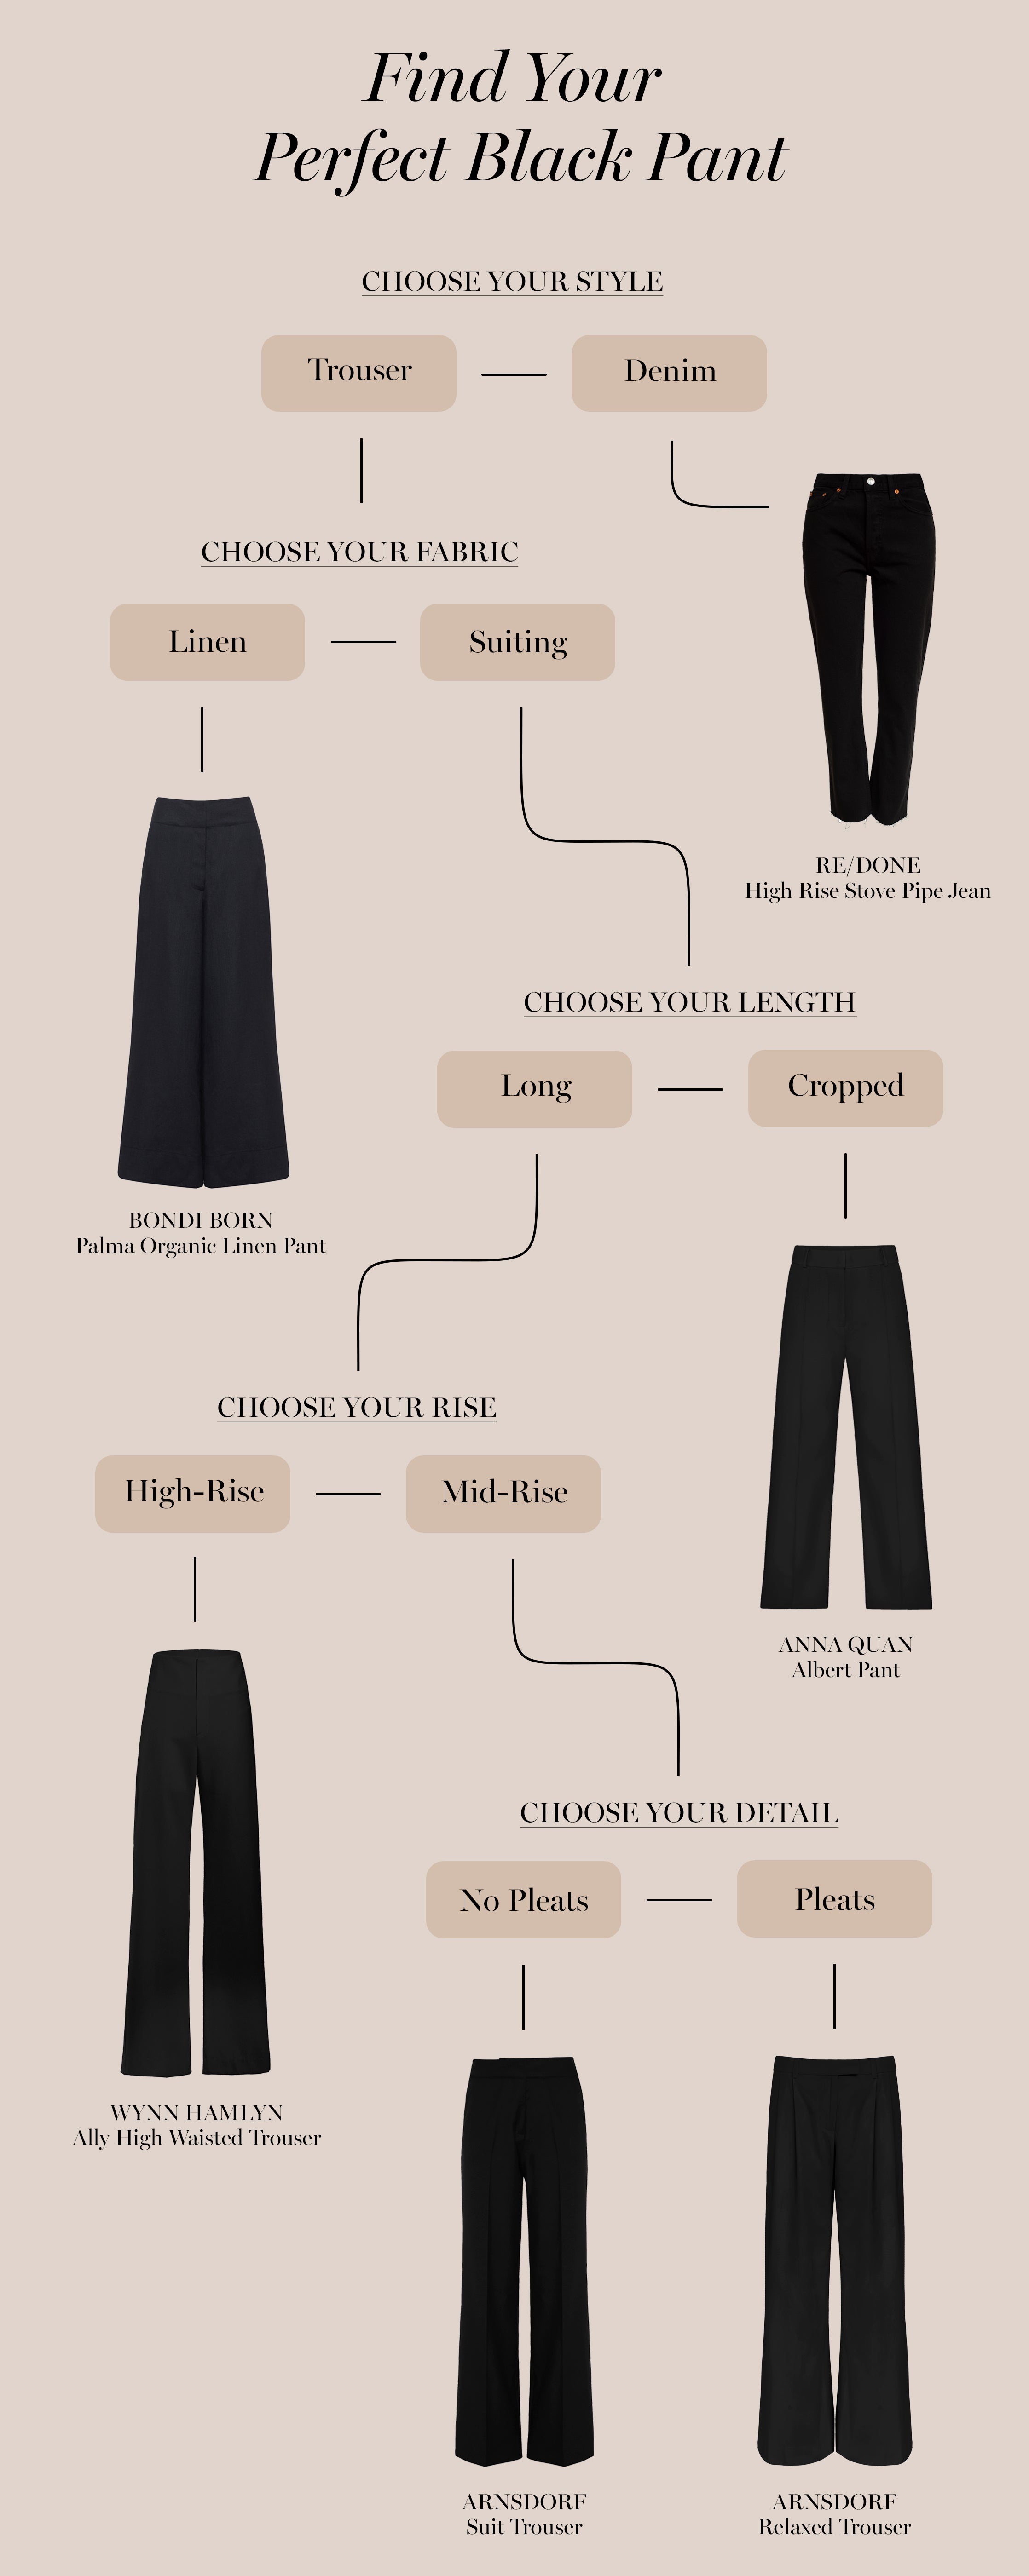 Found! The Perfect Black Pants